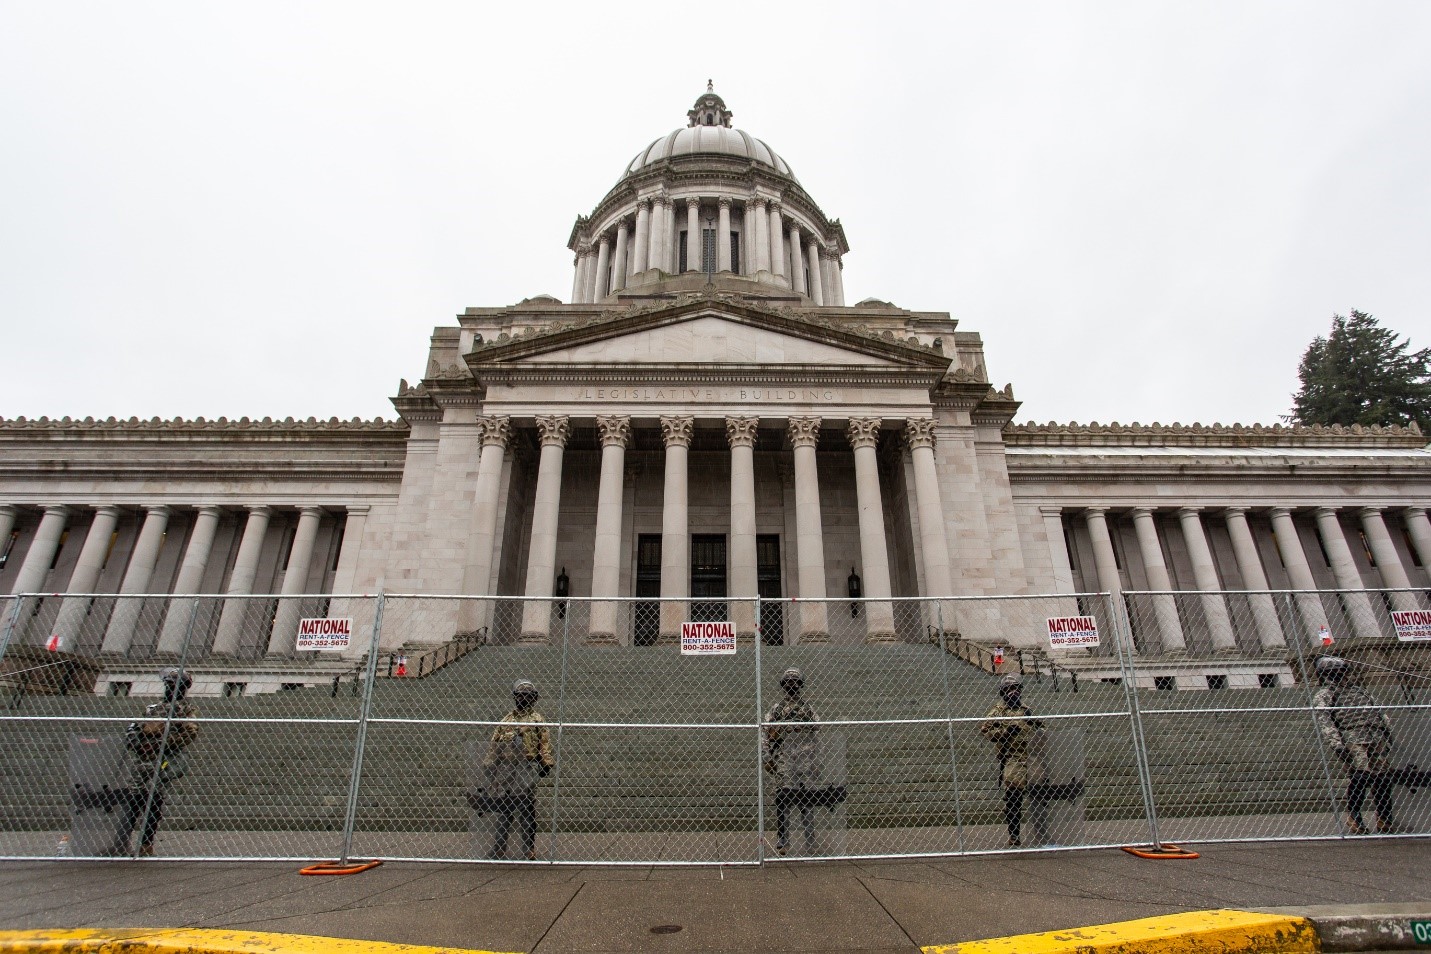 National Guard solider stand behind a fence in front of the steps of the Washington State Capitol